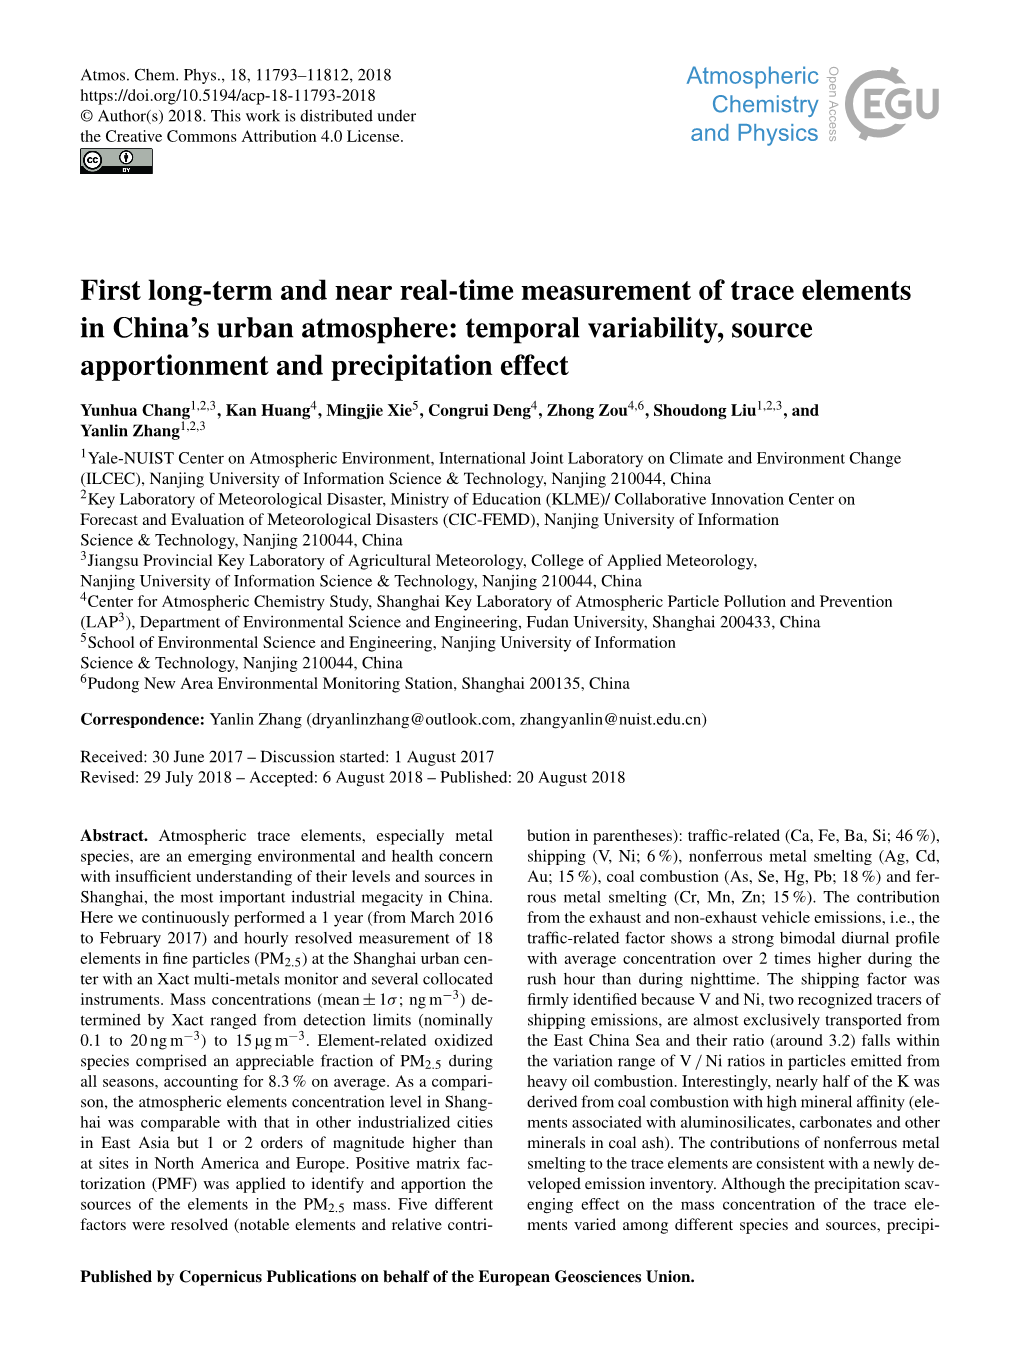 First Long-Term and Near Real-Time Measurement of Trace Elements in China’S Urban Atmosphere: Temporal Variability, Source Apportionment and Precipitation Effect